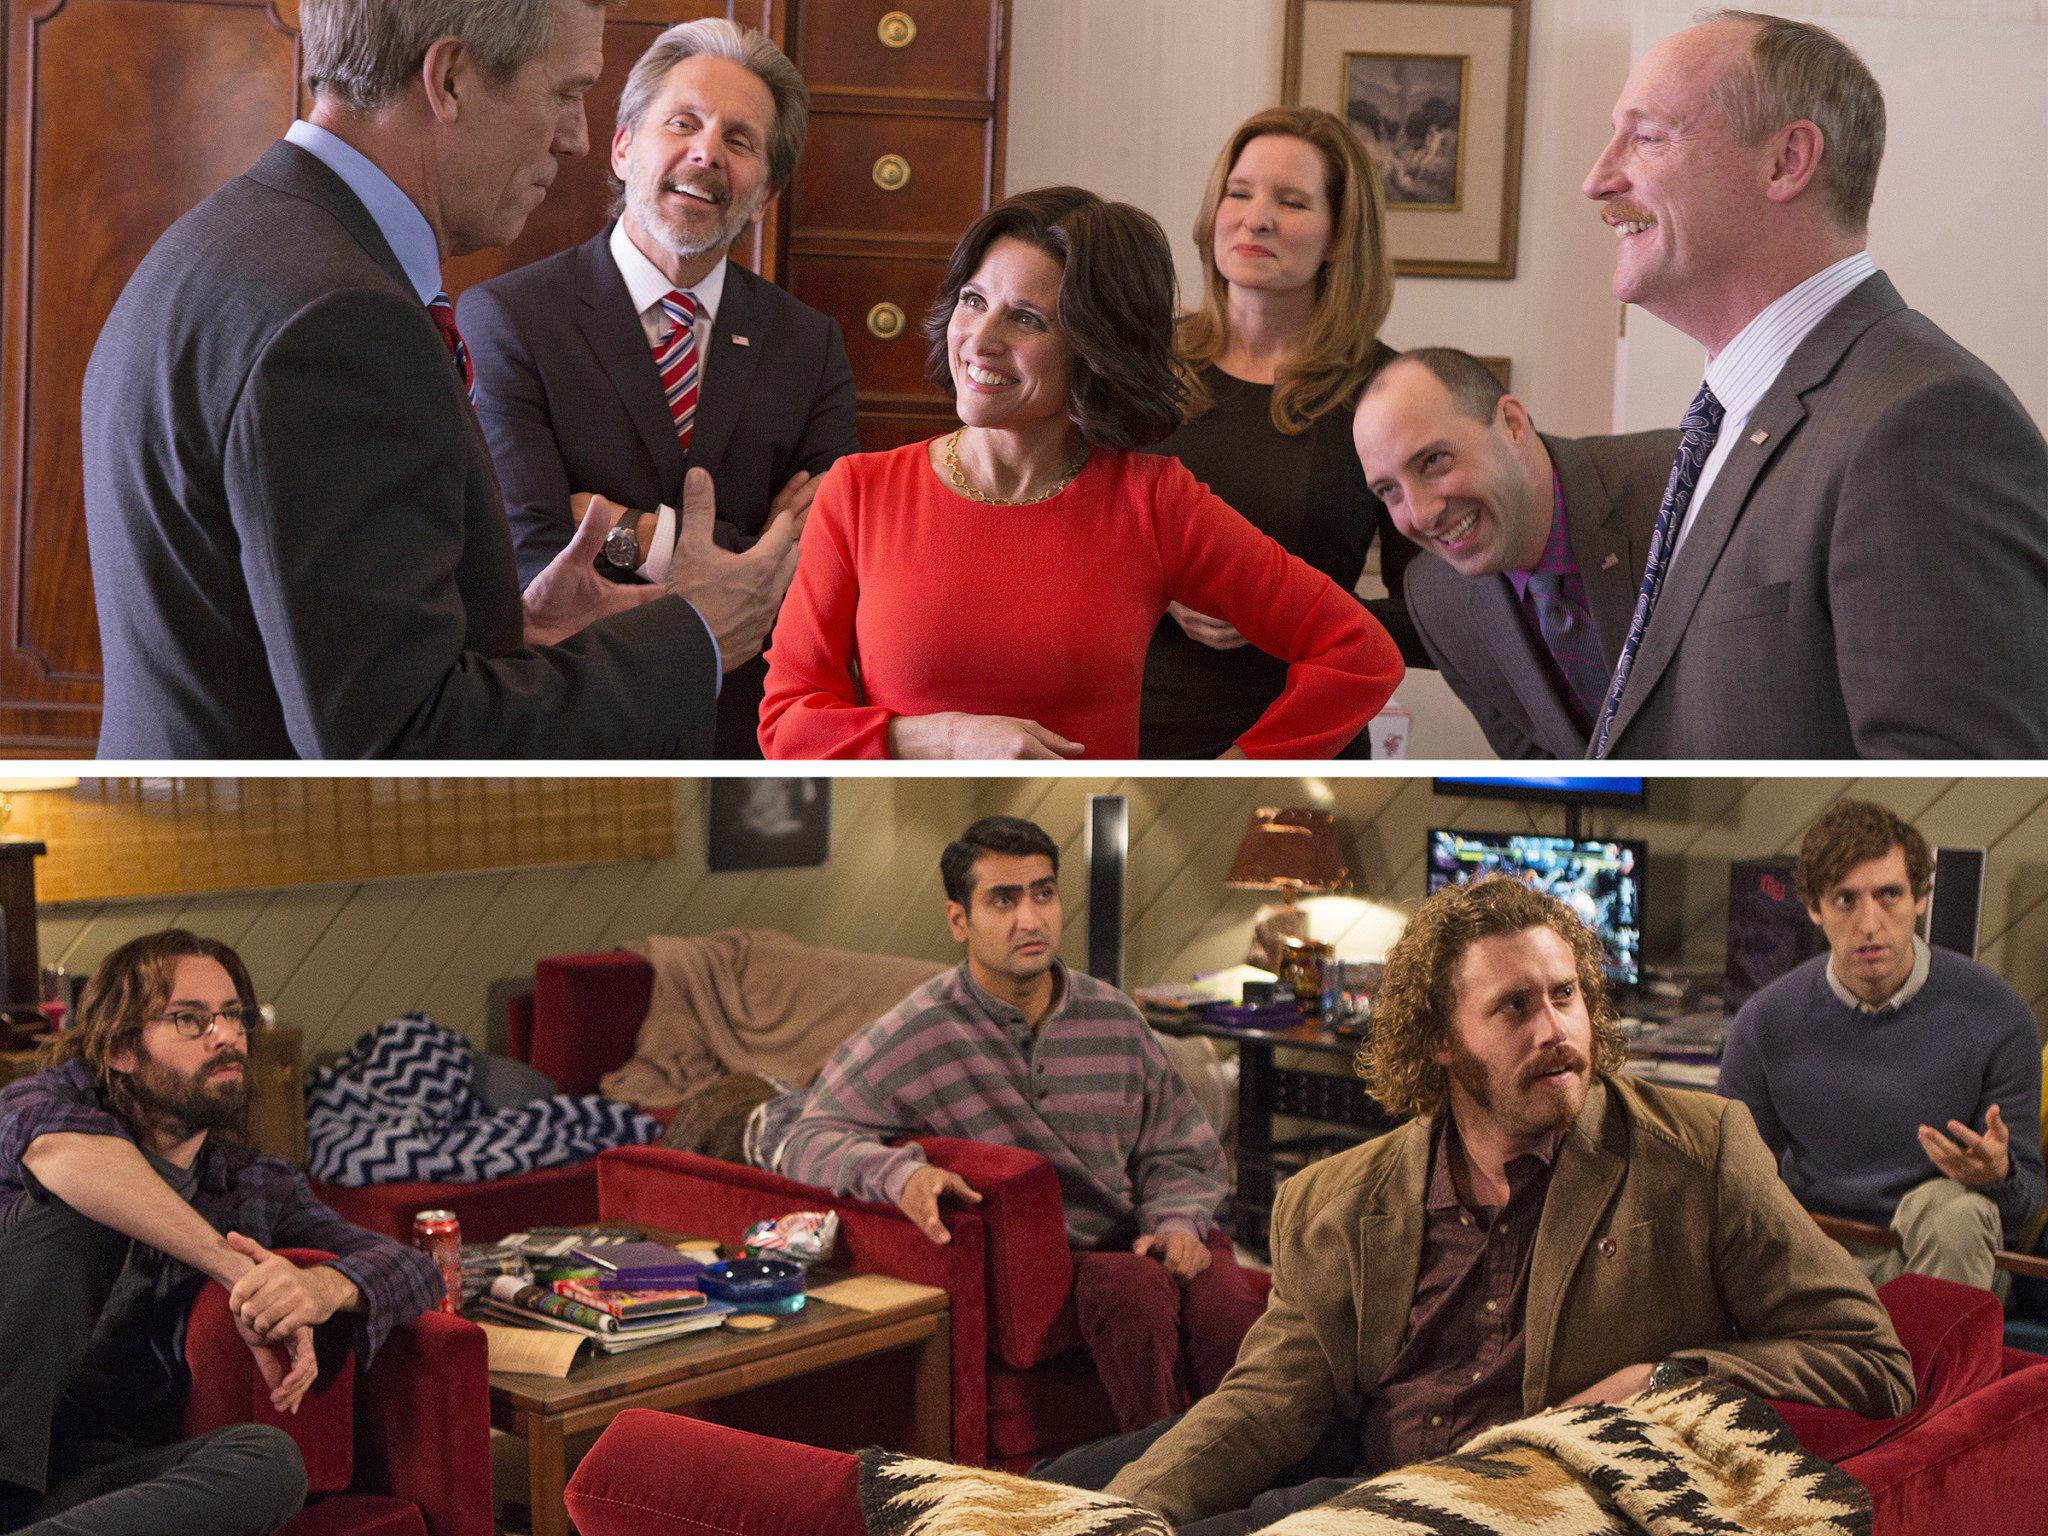 Veep and Silicon Valley